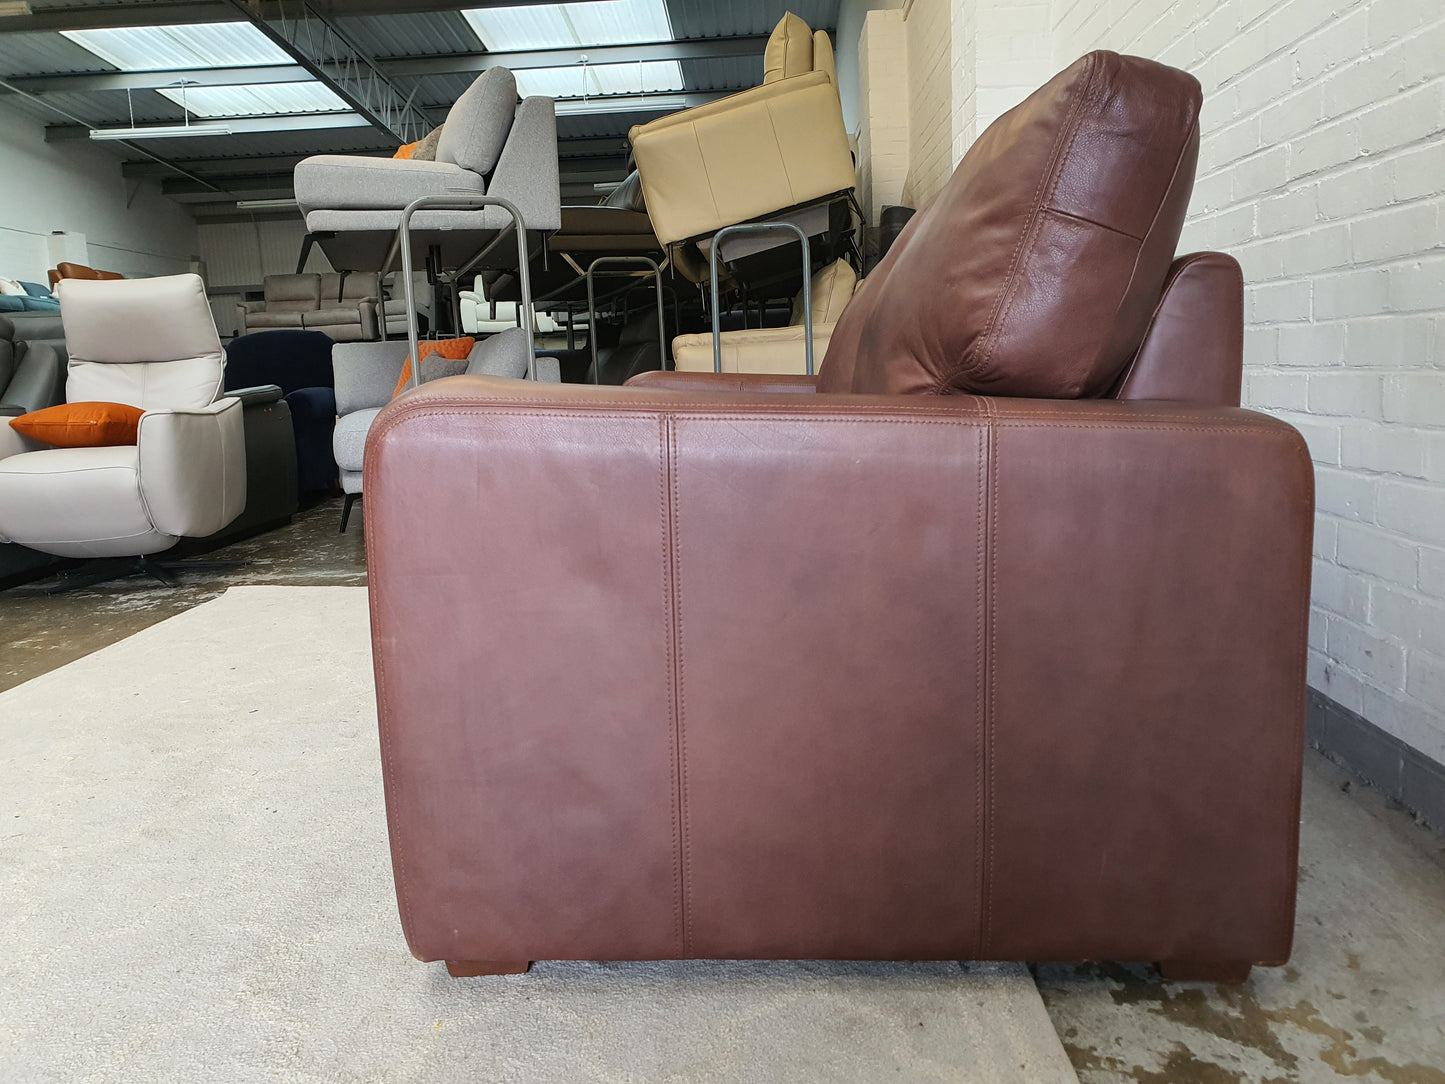 Real Leather Sofa 3 seater